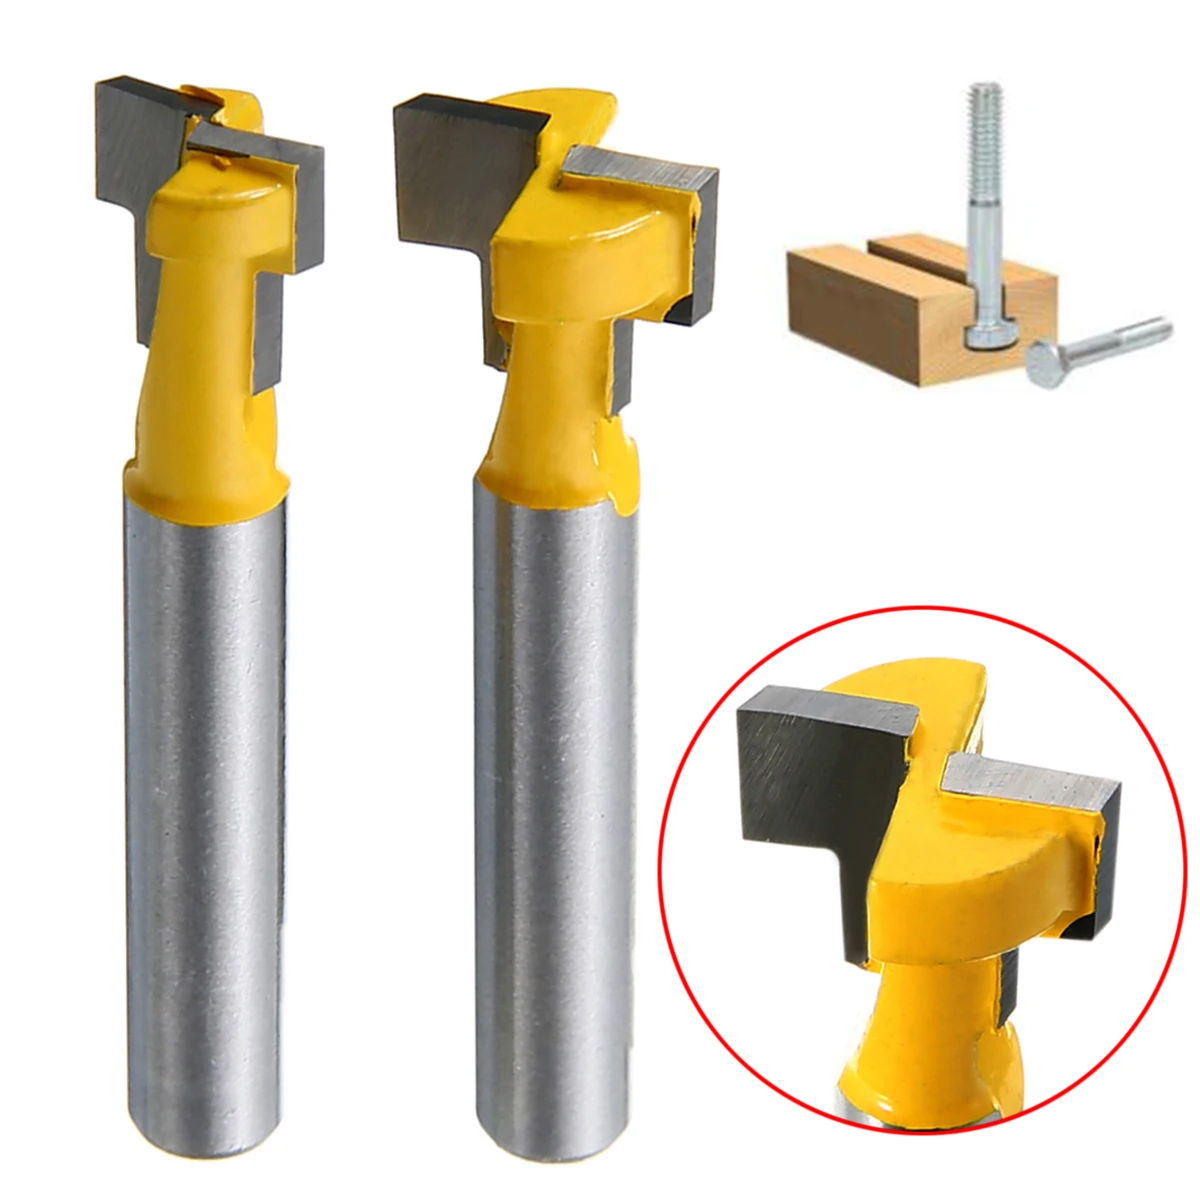 2Pcs 3/8'' & 1/2'' T-Slot Cutter Handle Router Bits 1/4'' Shank Woodworking Engraving Milling Cutter